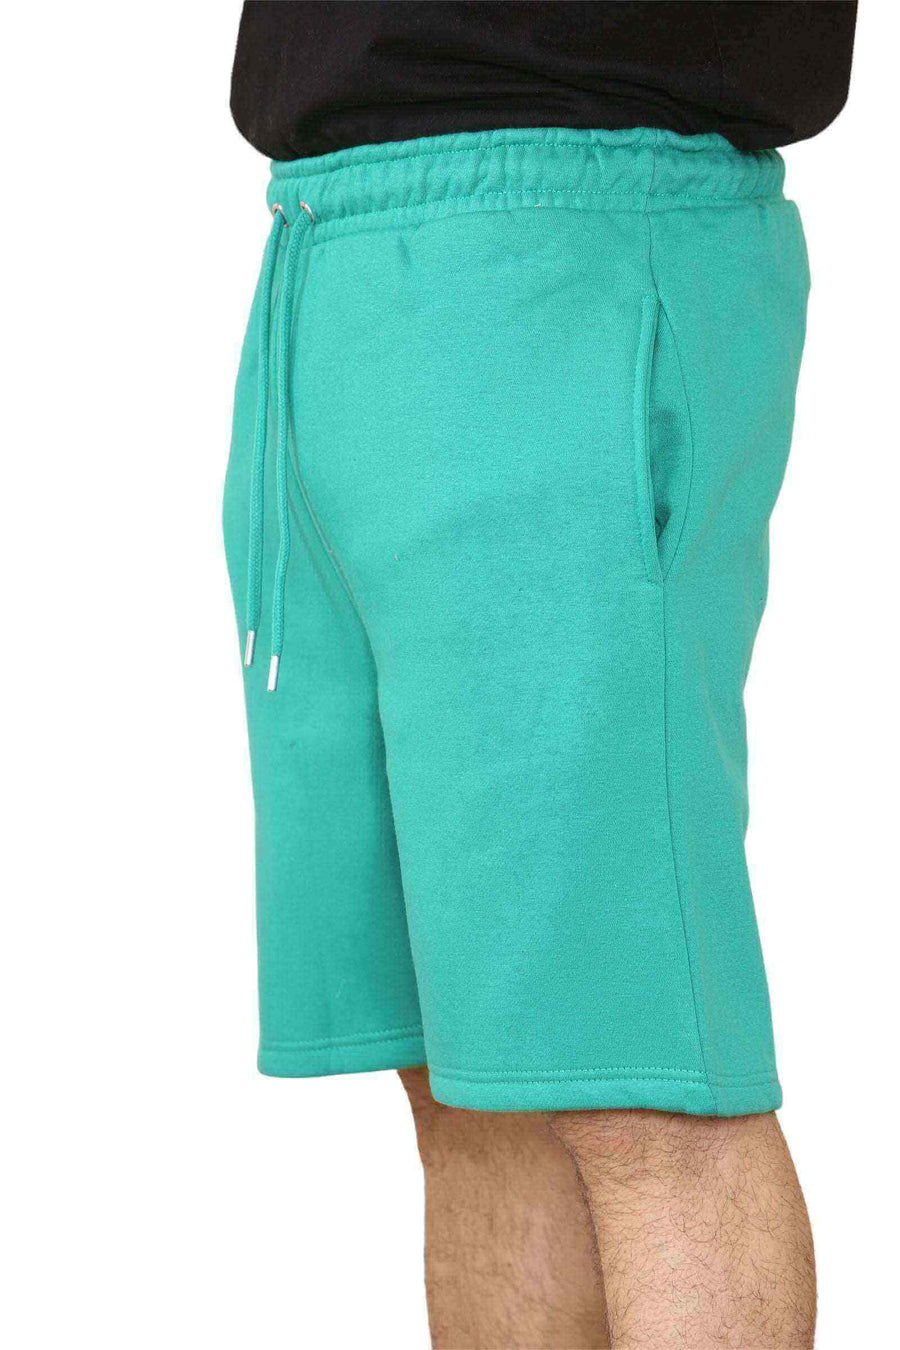 Left side of Men's Gym Shorts in Sage for Your Active Lifestyle